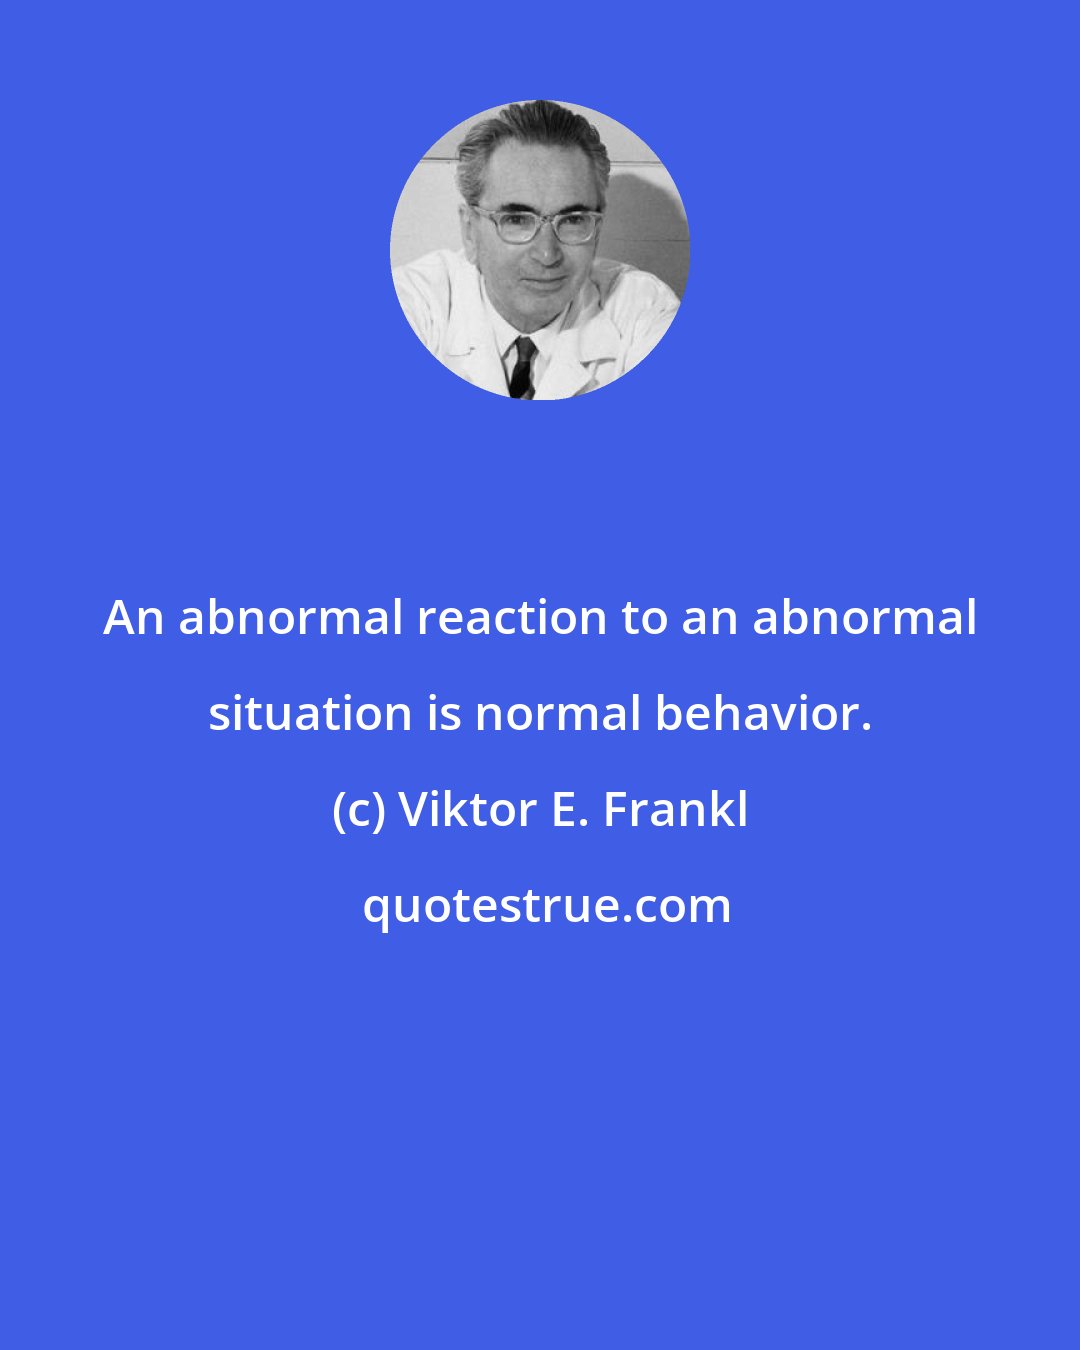 Viktor E. Frankl: An abnormal reaction to an abnormal situation is normal behavior.